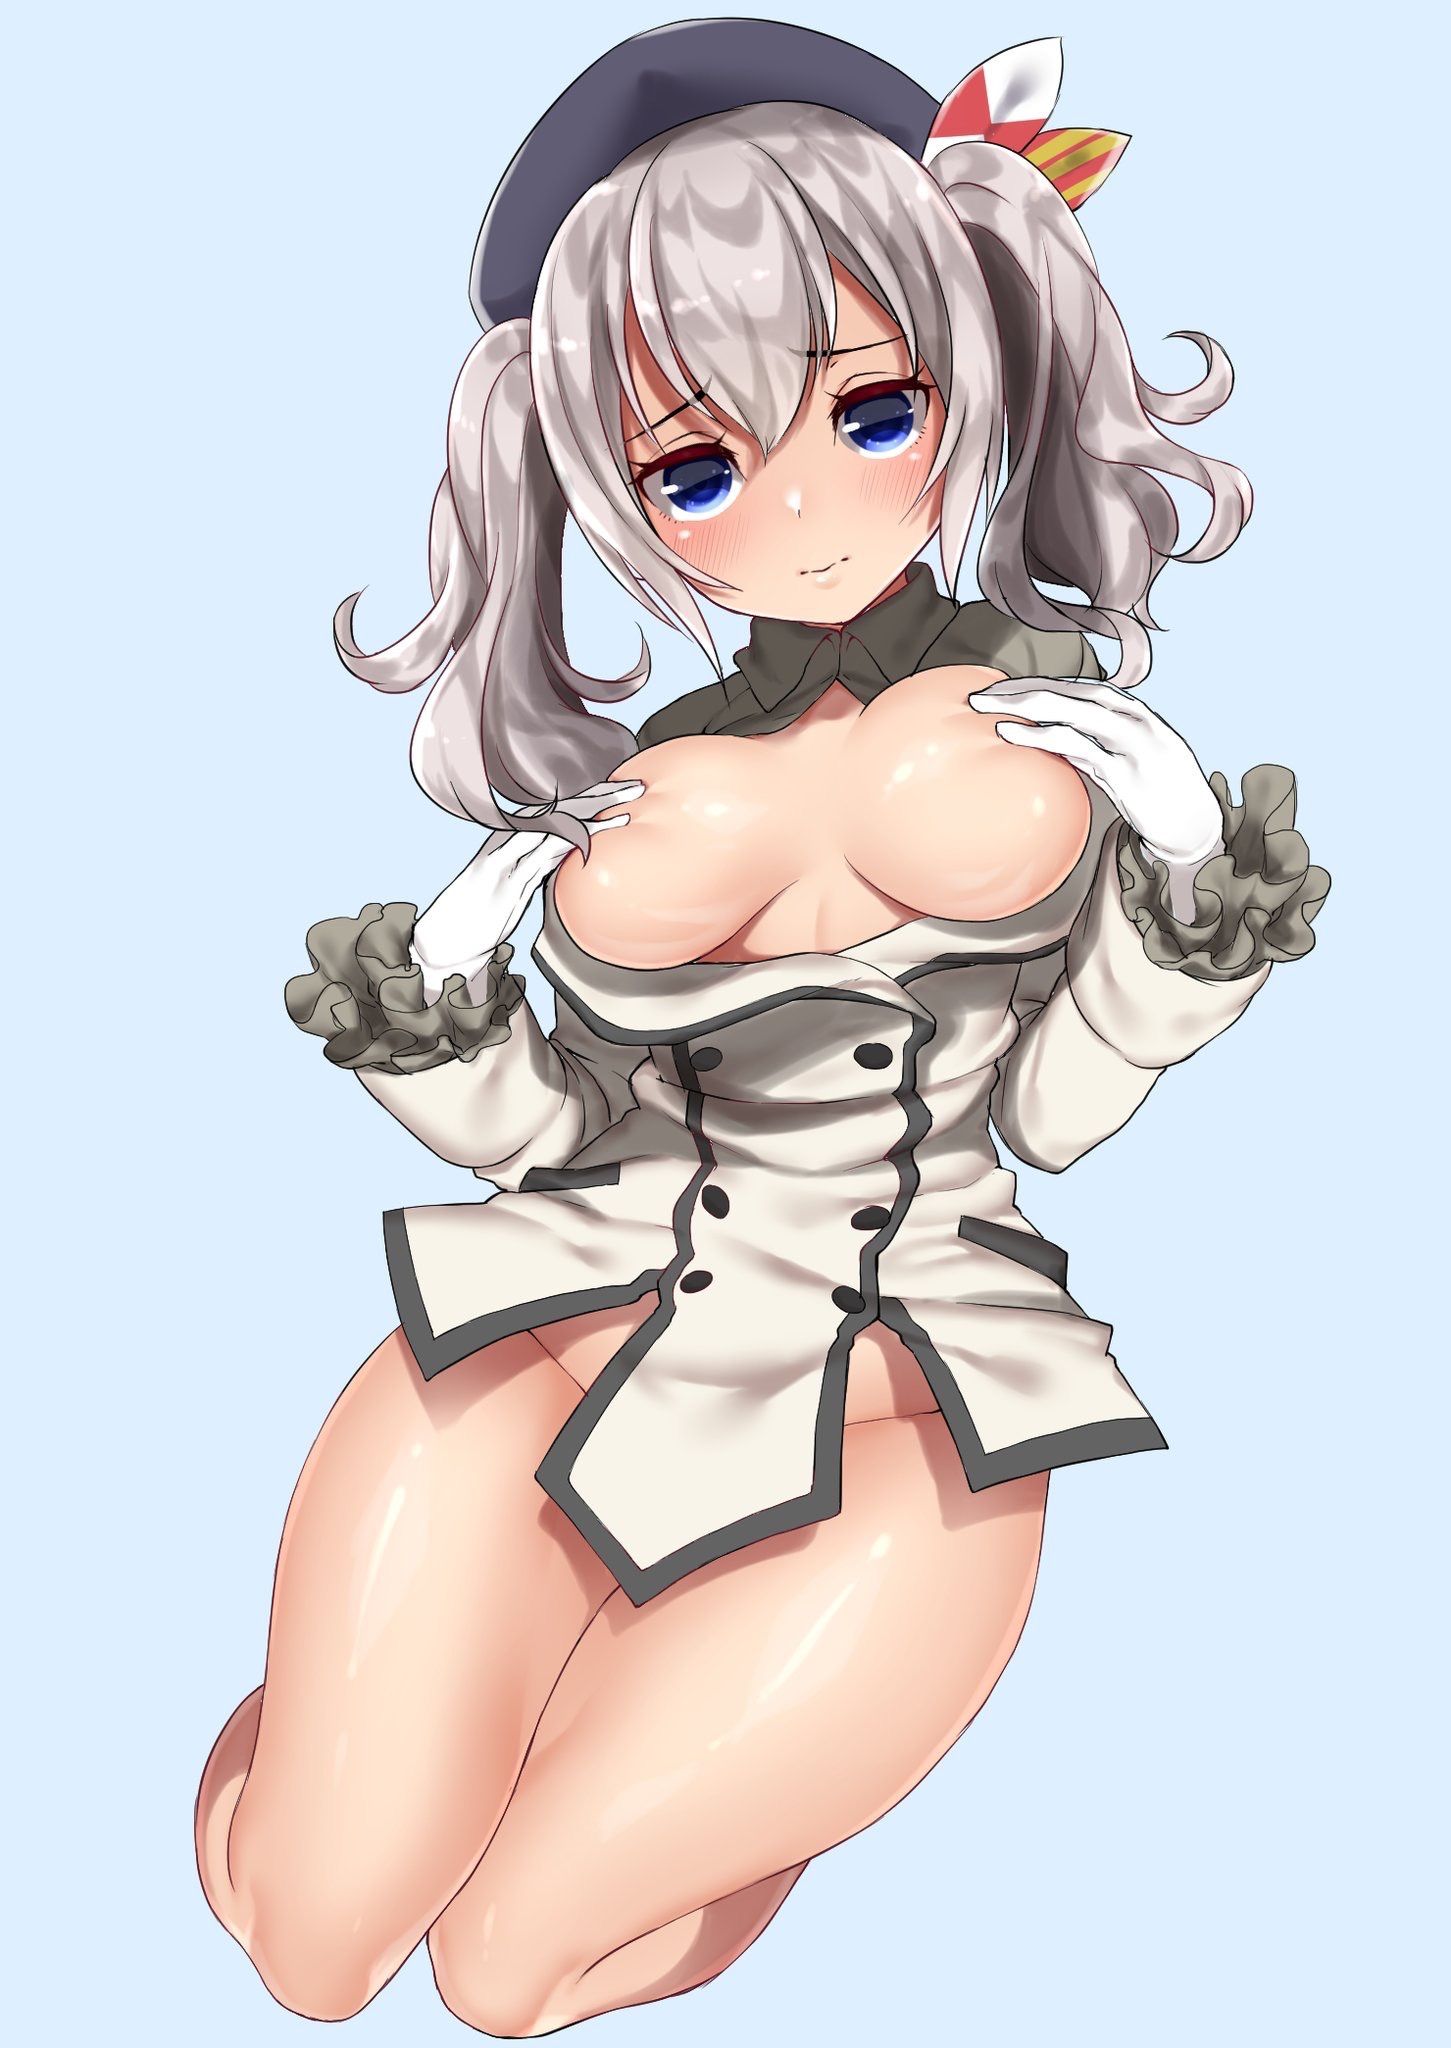 The gentleman who likes the image of Kantai is here. 1